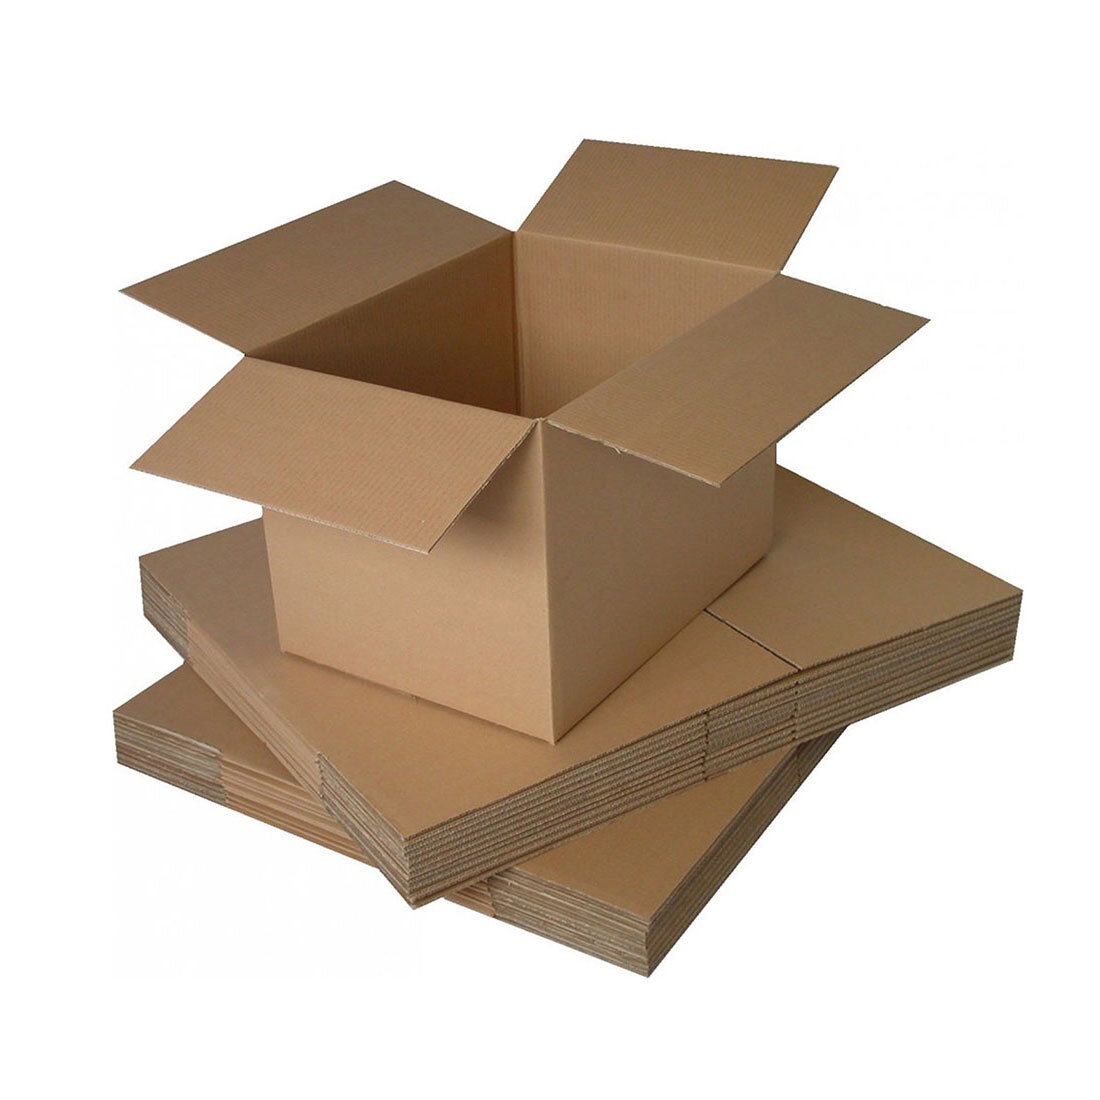 229x152x67mm Pack of 200 Boxed-Up Single Wall Cardboard Packing Gift Boxes 9 x 6 x 3 